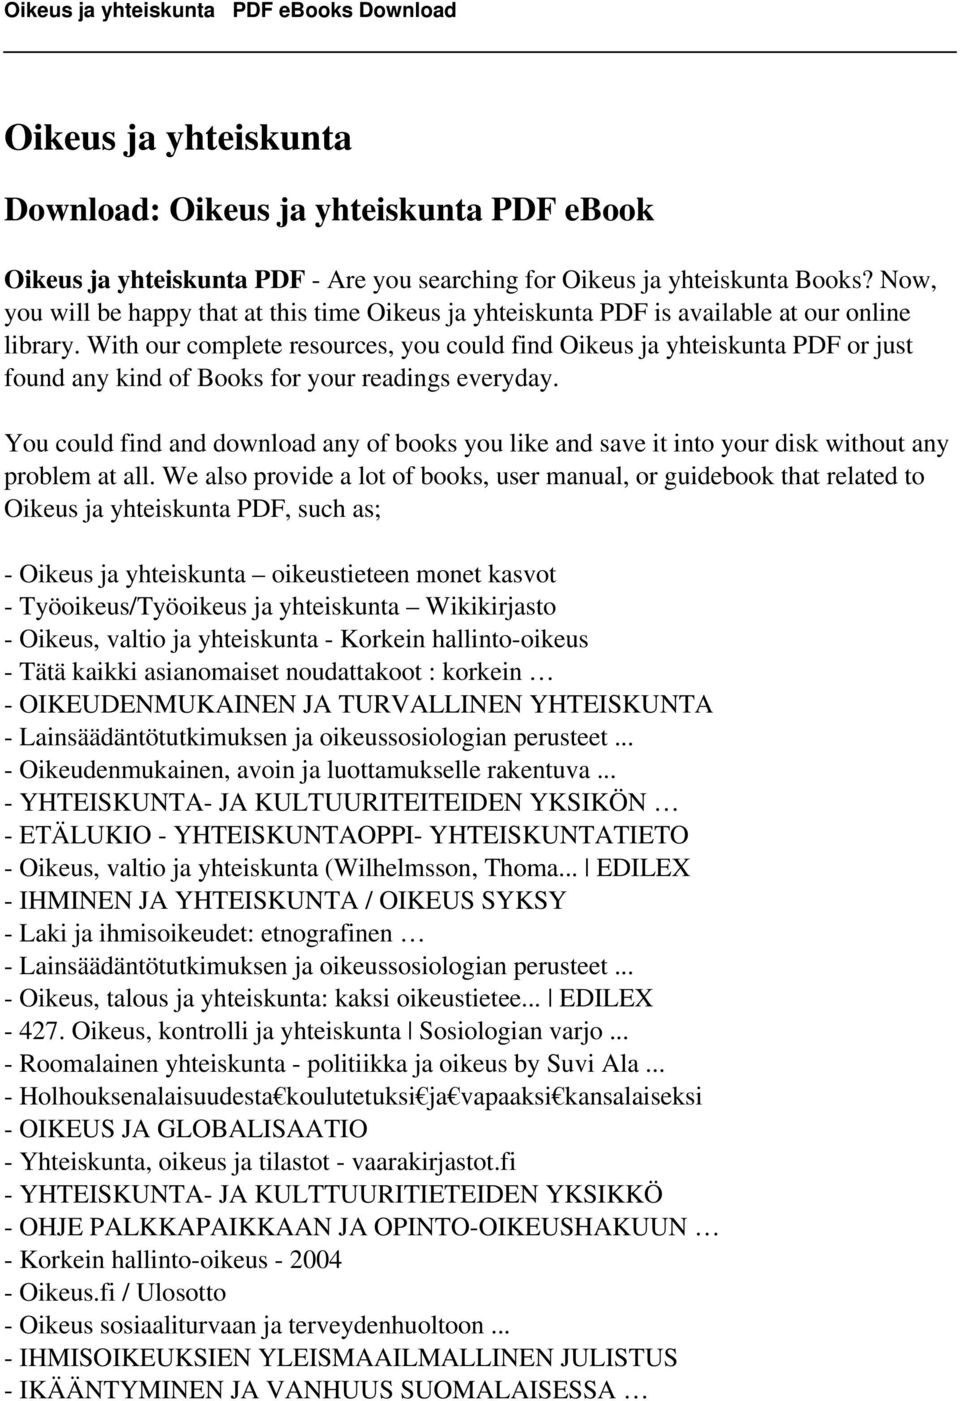 With our complete resources, you could find Oikeus ja yhteiskunta PDF or just found any kind of Books for your readings everyday.